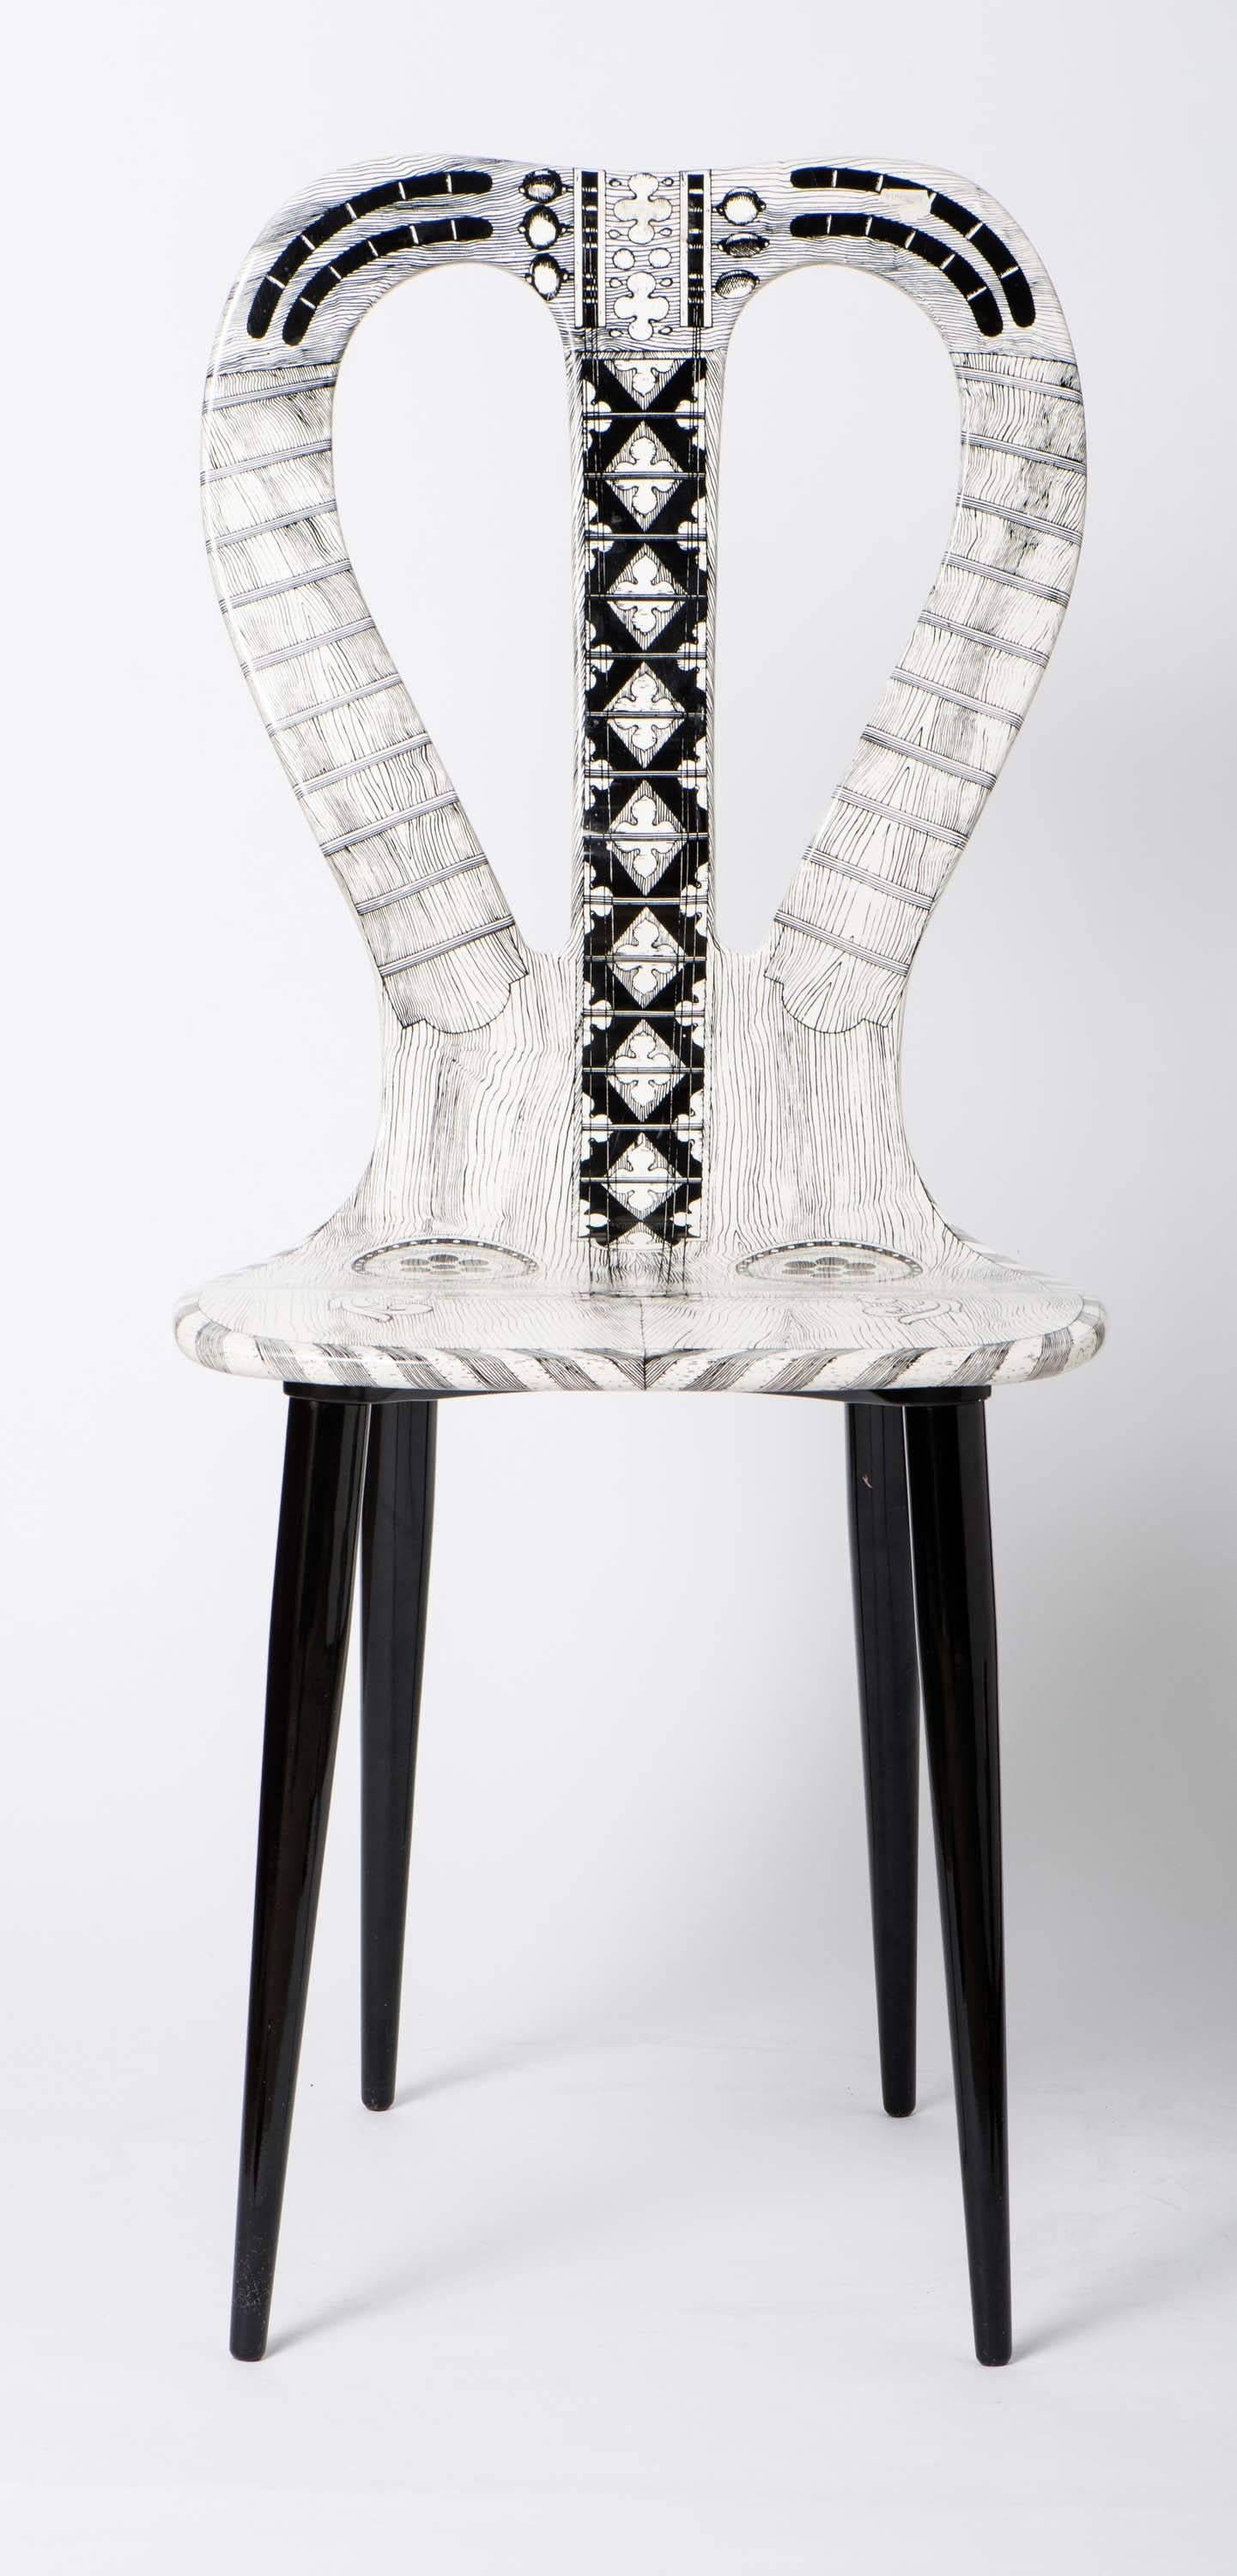 A chair by Atelier Fornasetti.
“Musicale”.
Lithographically printed.
Wood, lacquer, wooden legs.
Italy, 2006, no. 4.
 